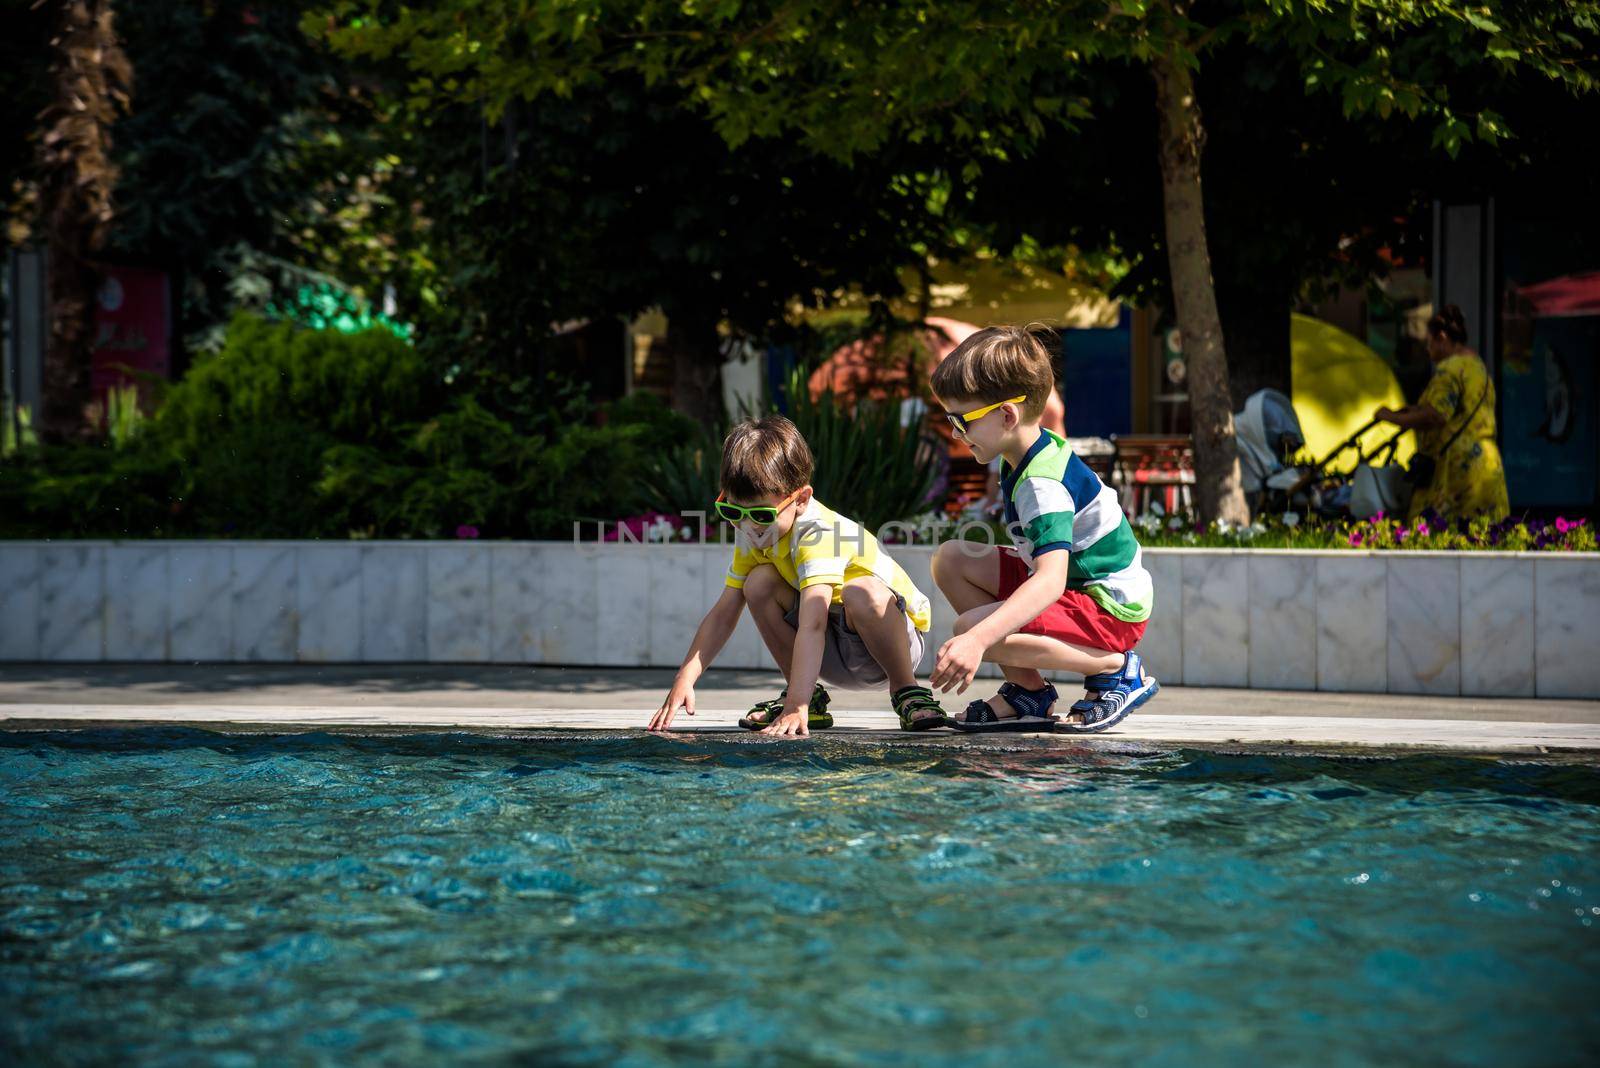 Group of happy children playing outdoors near pool or fountain. Kids having fun in park during summer vacation. Dressed in colorful t-shirts and shorts with sunglasses. Summer holiday concept by Kobysh